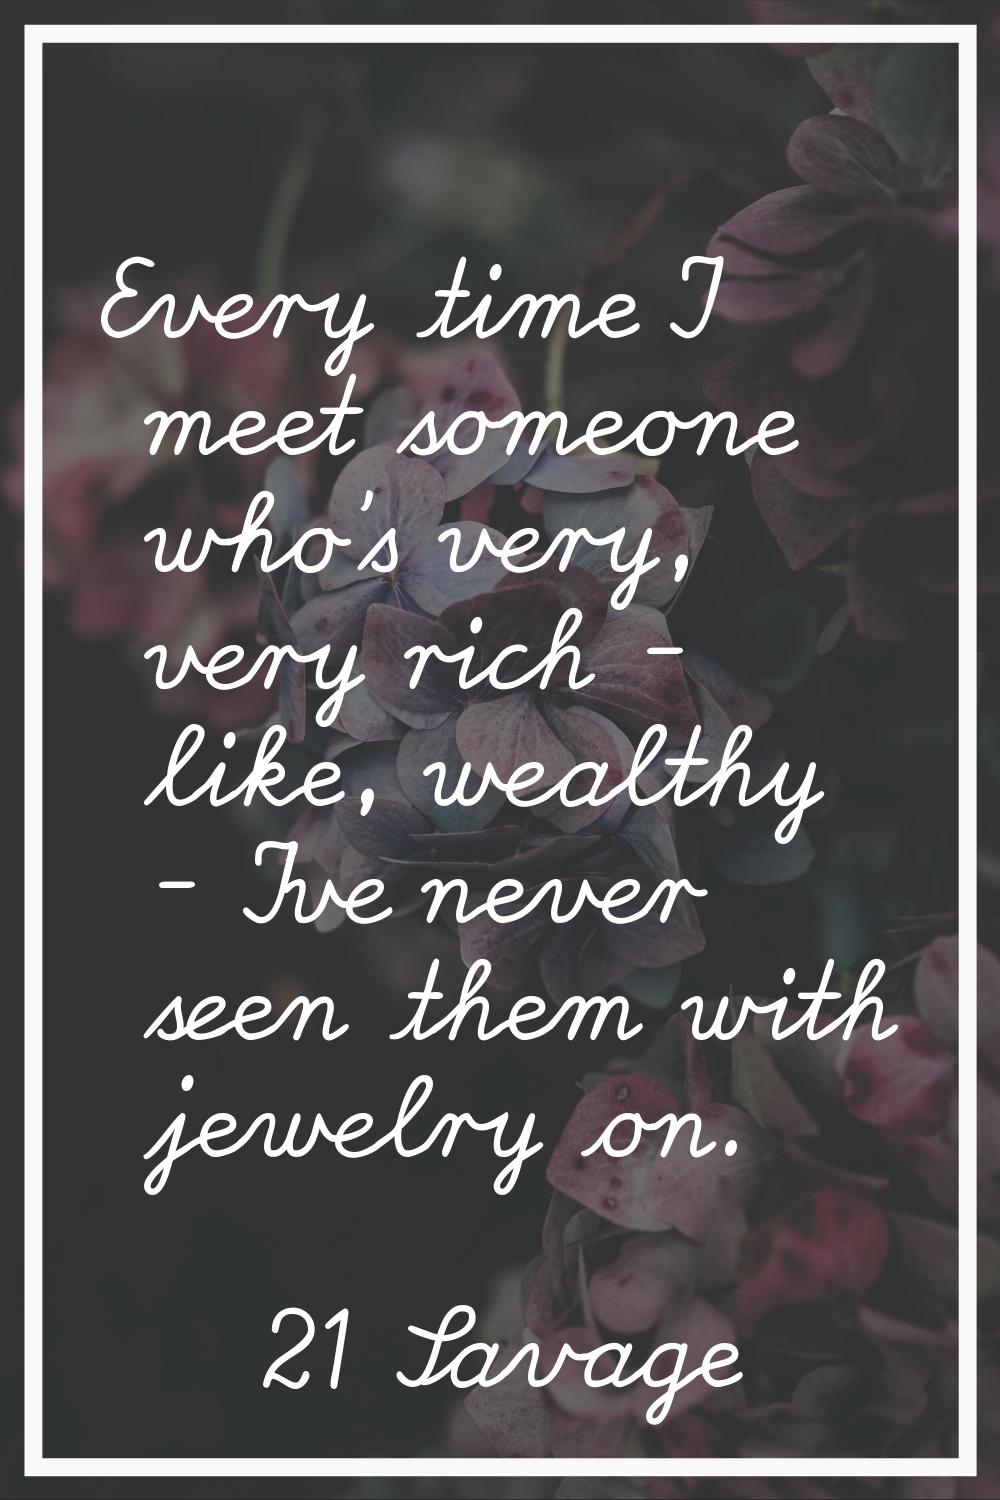 Every time I meet someone who's very, very rich - like, wealthy - I've never seen them with jewelry